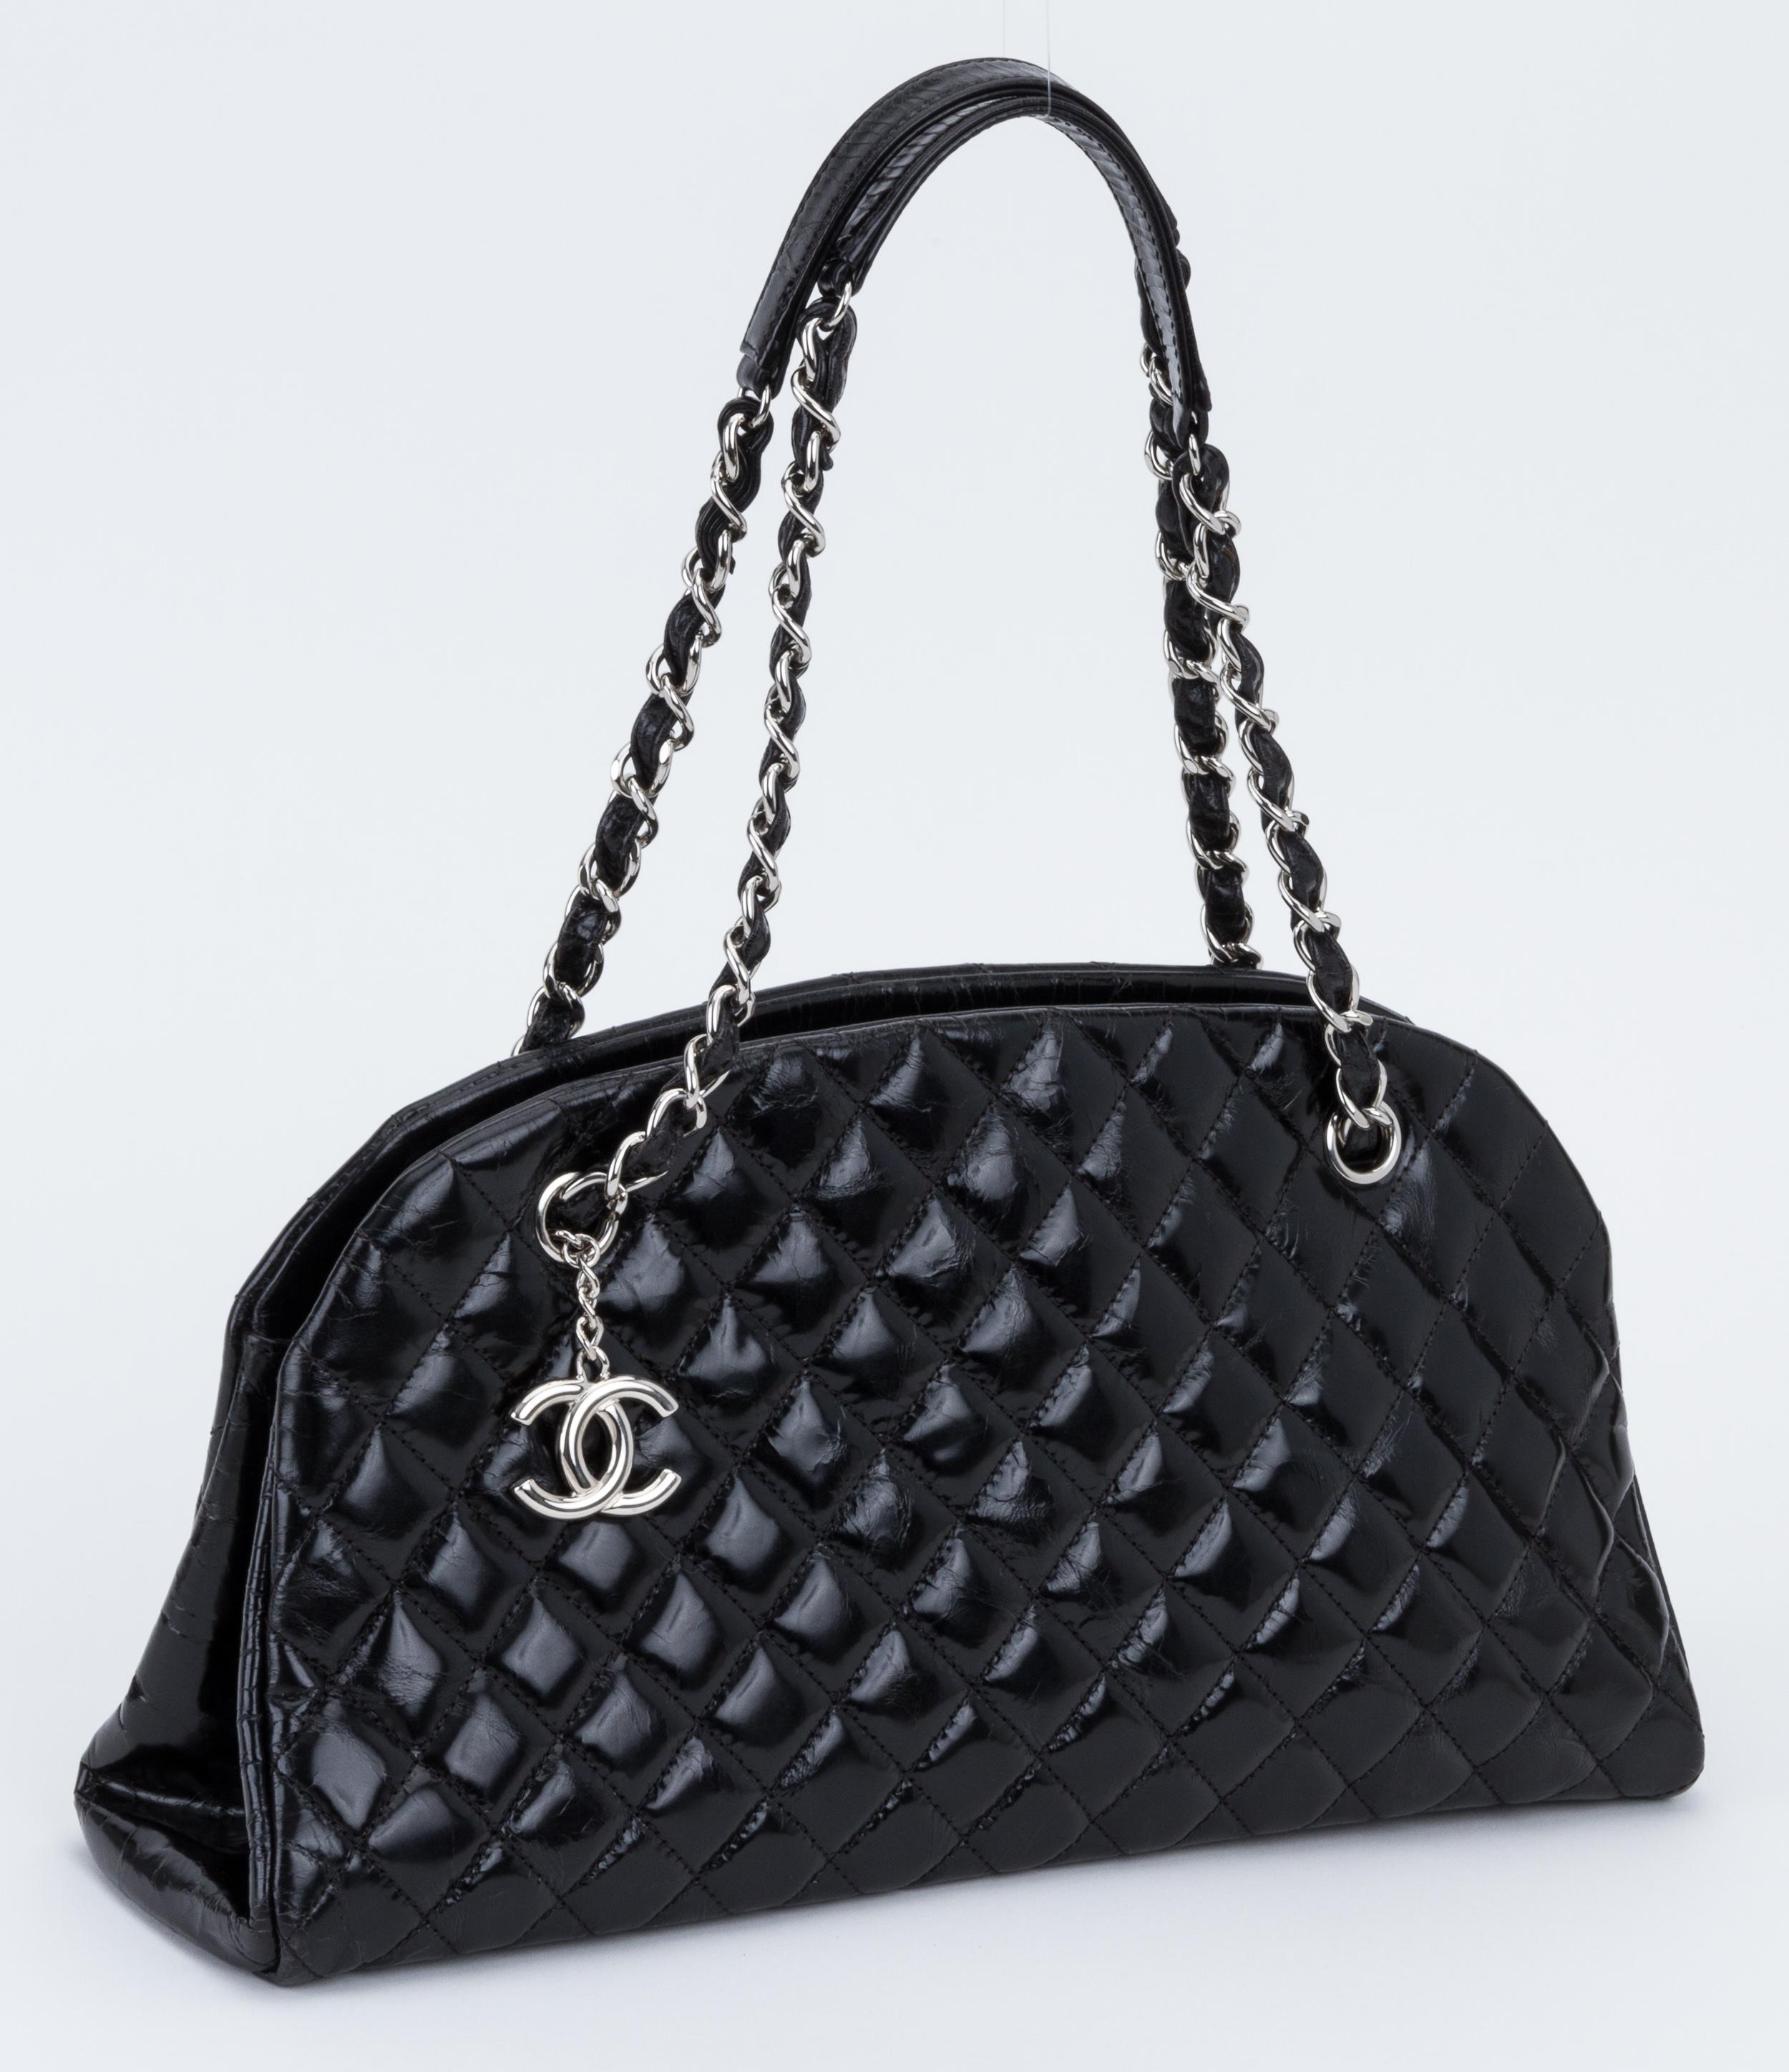 Chanel quilted black distressed patent leather mademoiselle bag with silver hardware. Shoulder drop 9